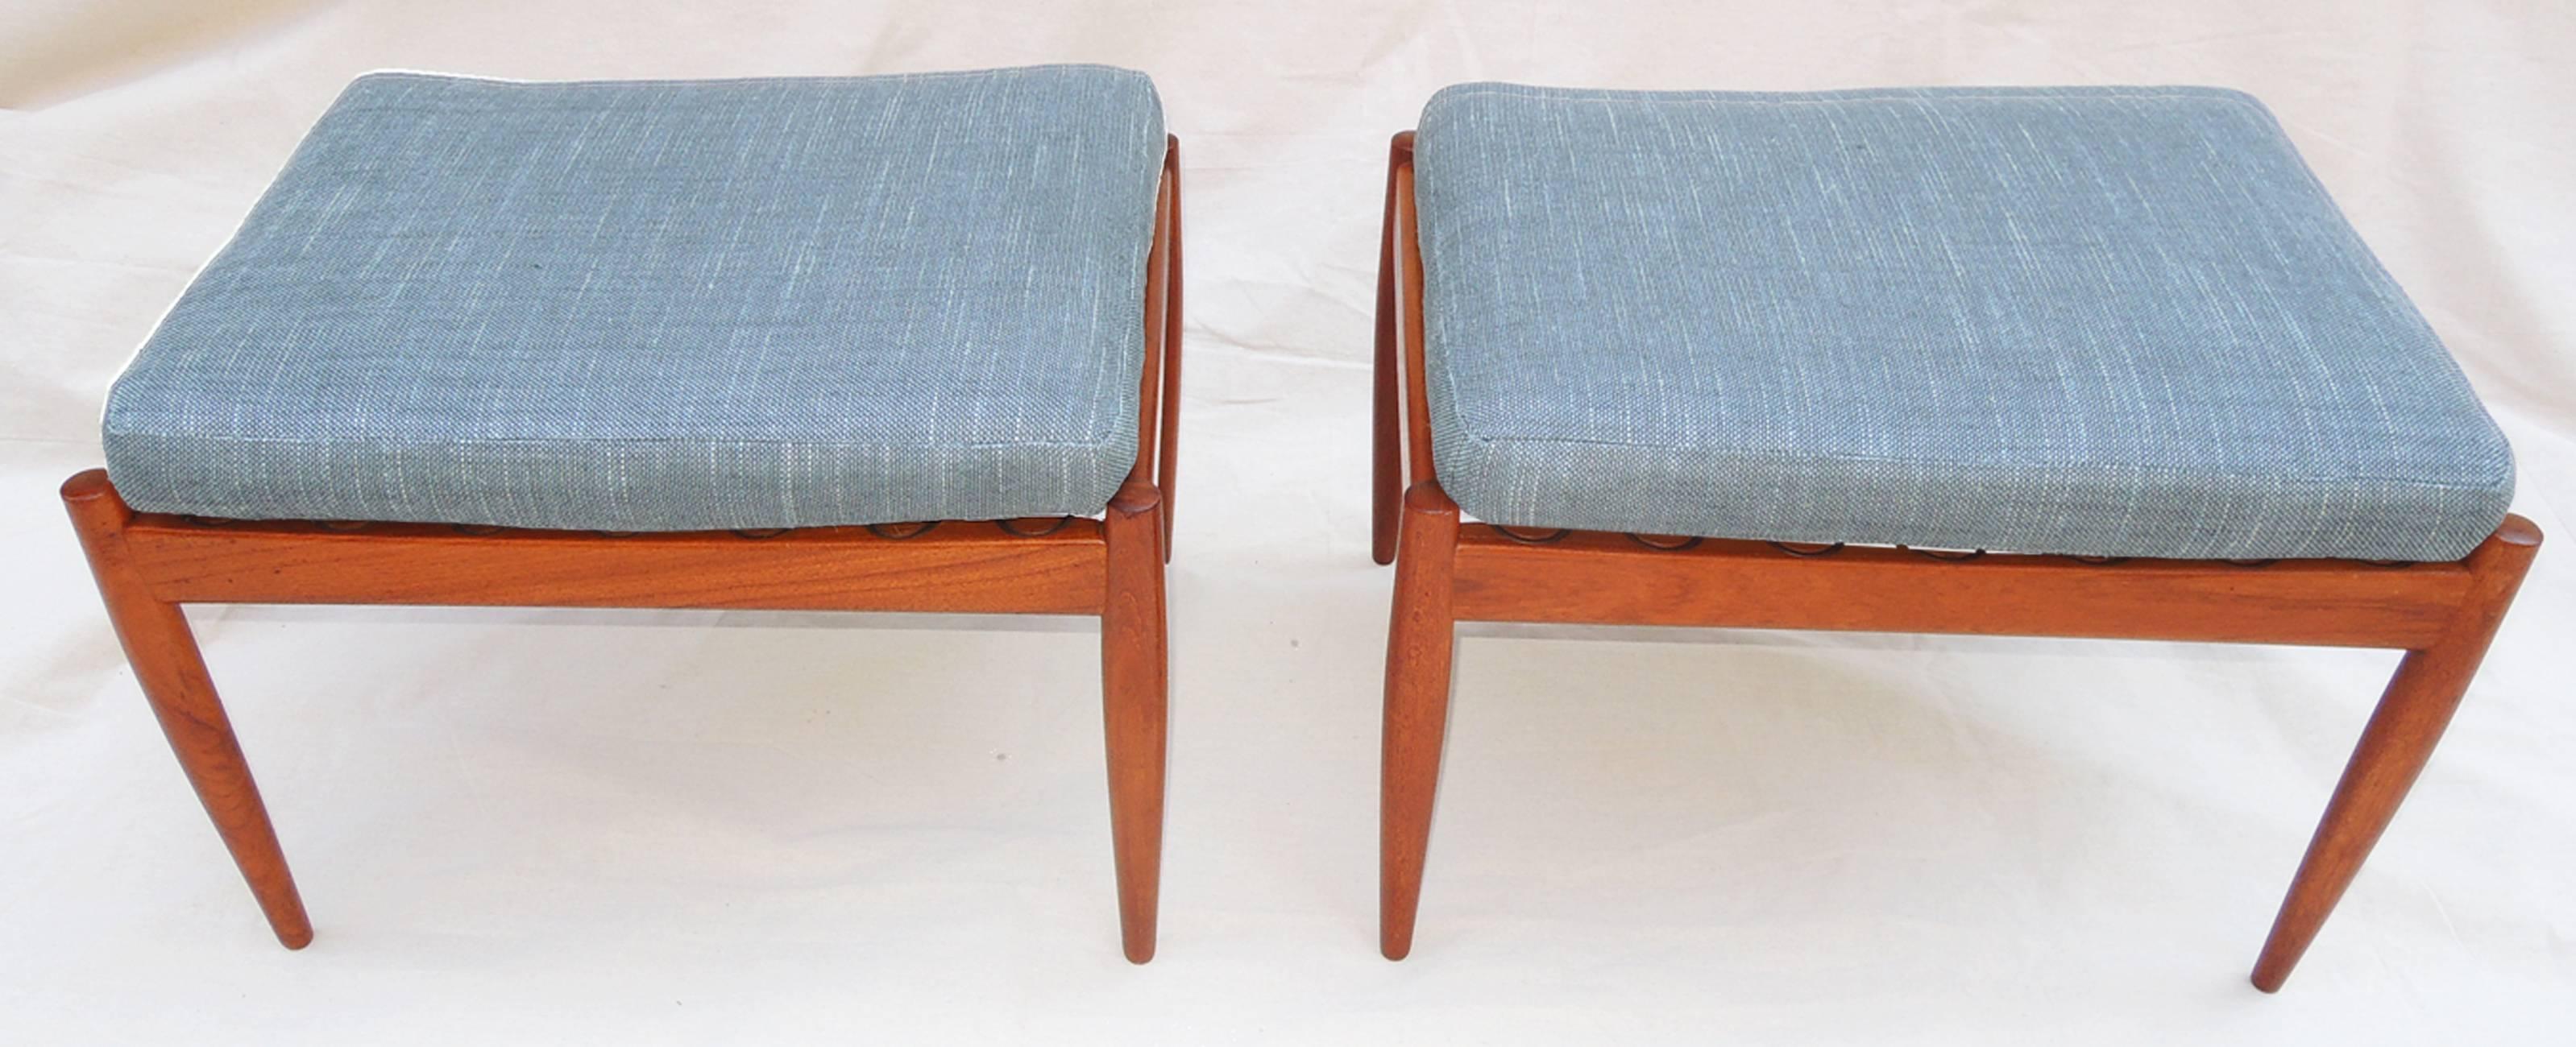 Simple and elegant pair of teak footstools by Kai Kristiansen for Magnus Olesen Durup in 1950s. Light, easy to move and covered in period-style textured fabric by Mokum. Original labels intact.